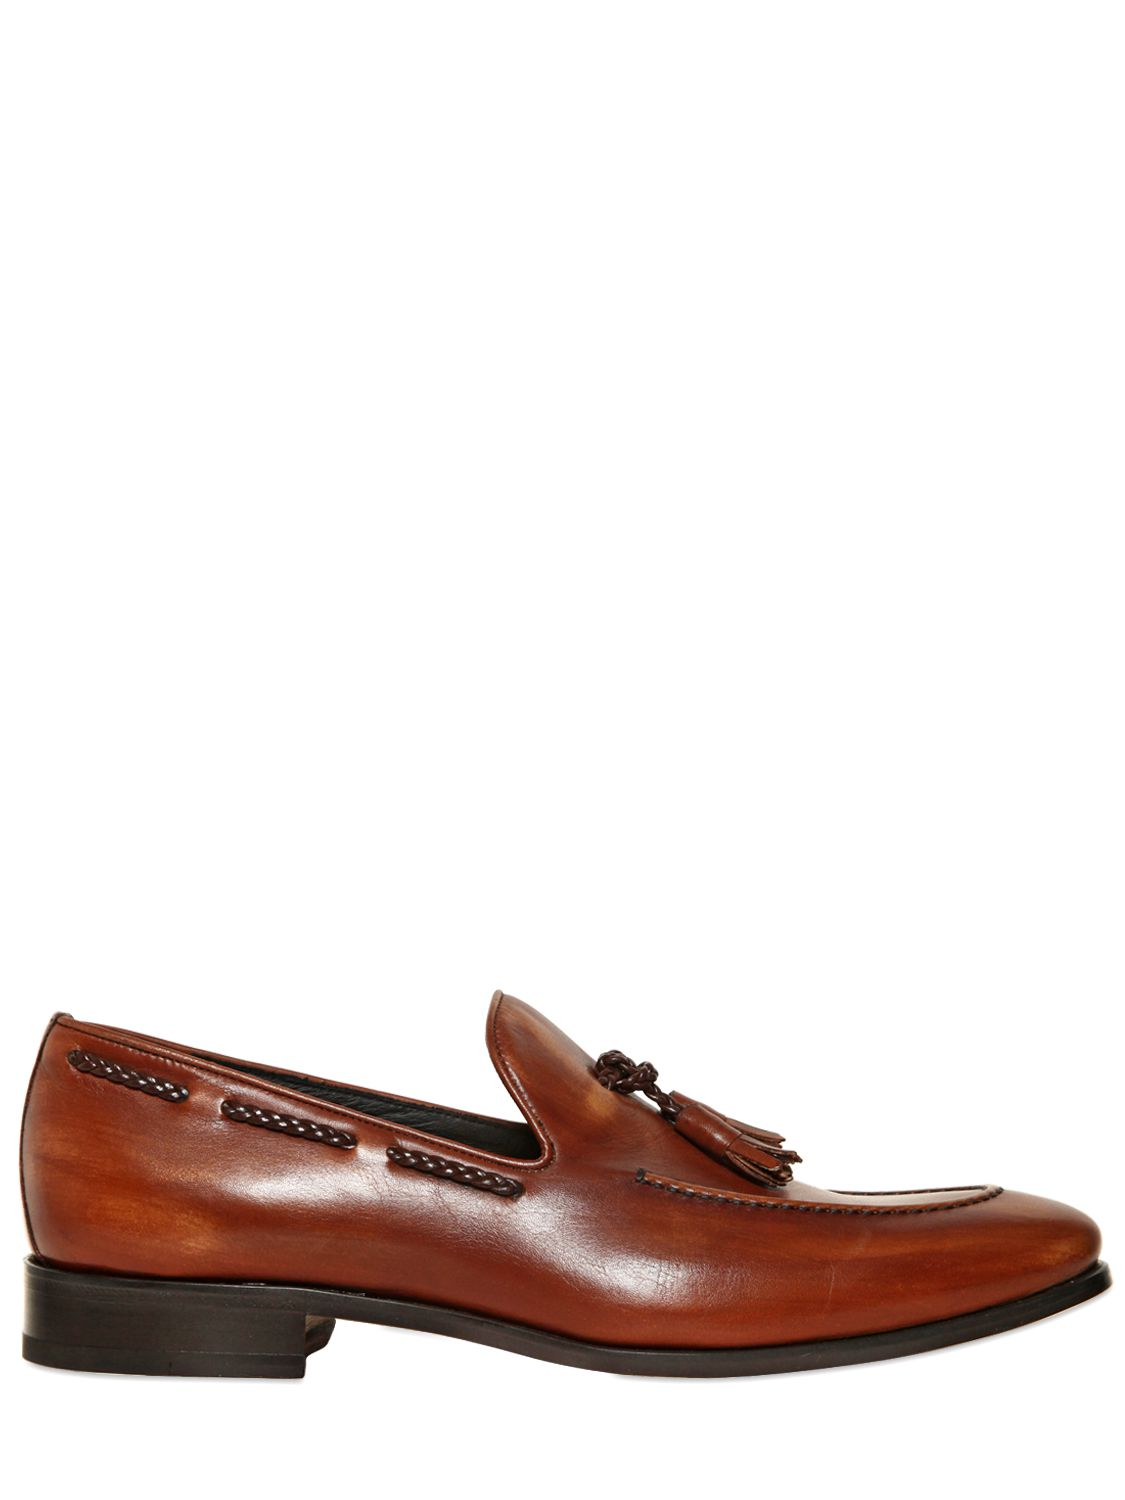 Lyst - Bruno magli Hand Brushed Tasseled Leather Loafers in Brown for Men